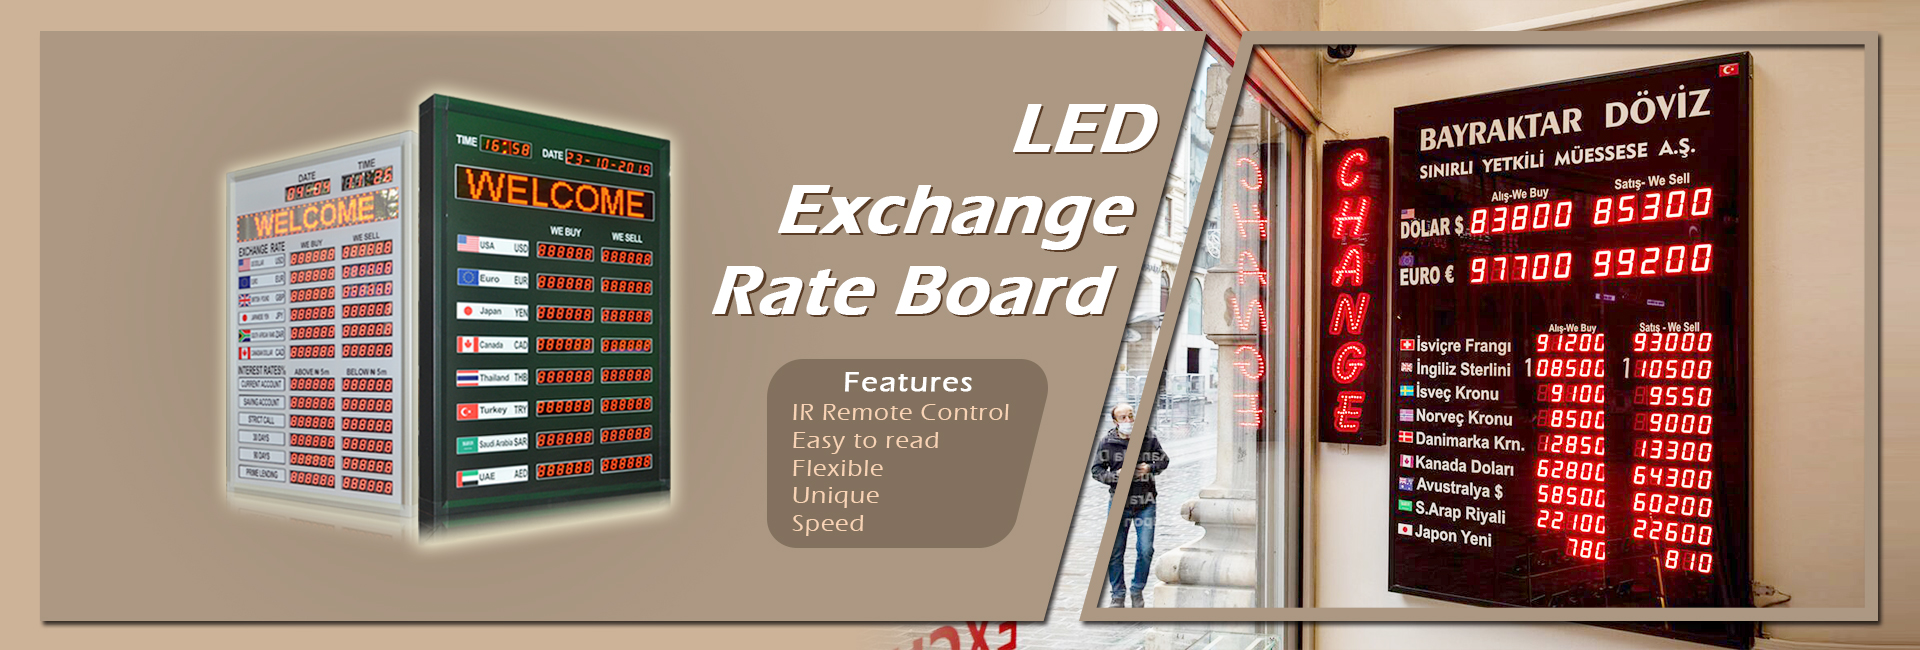 led exchange rate board